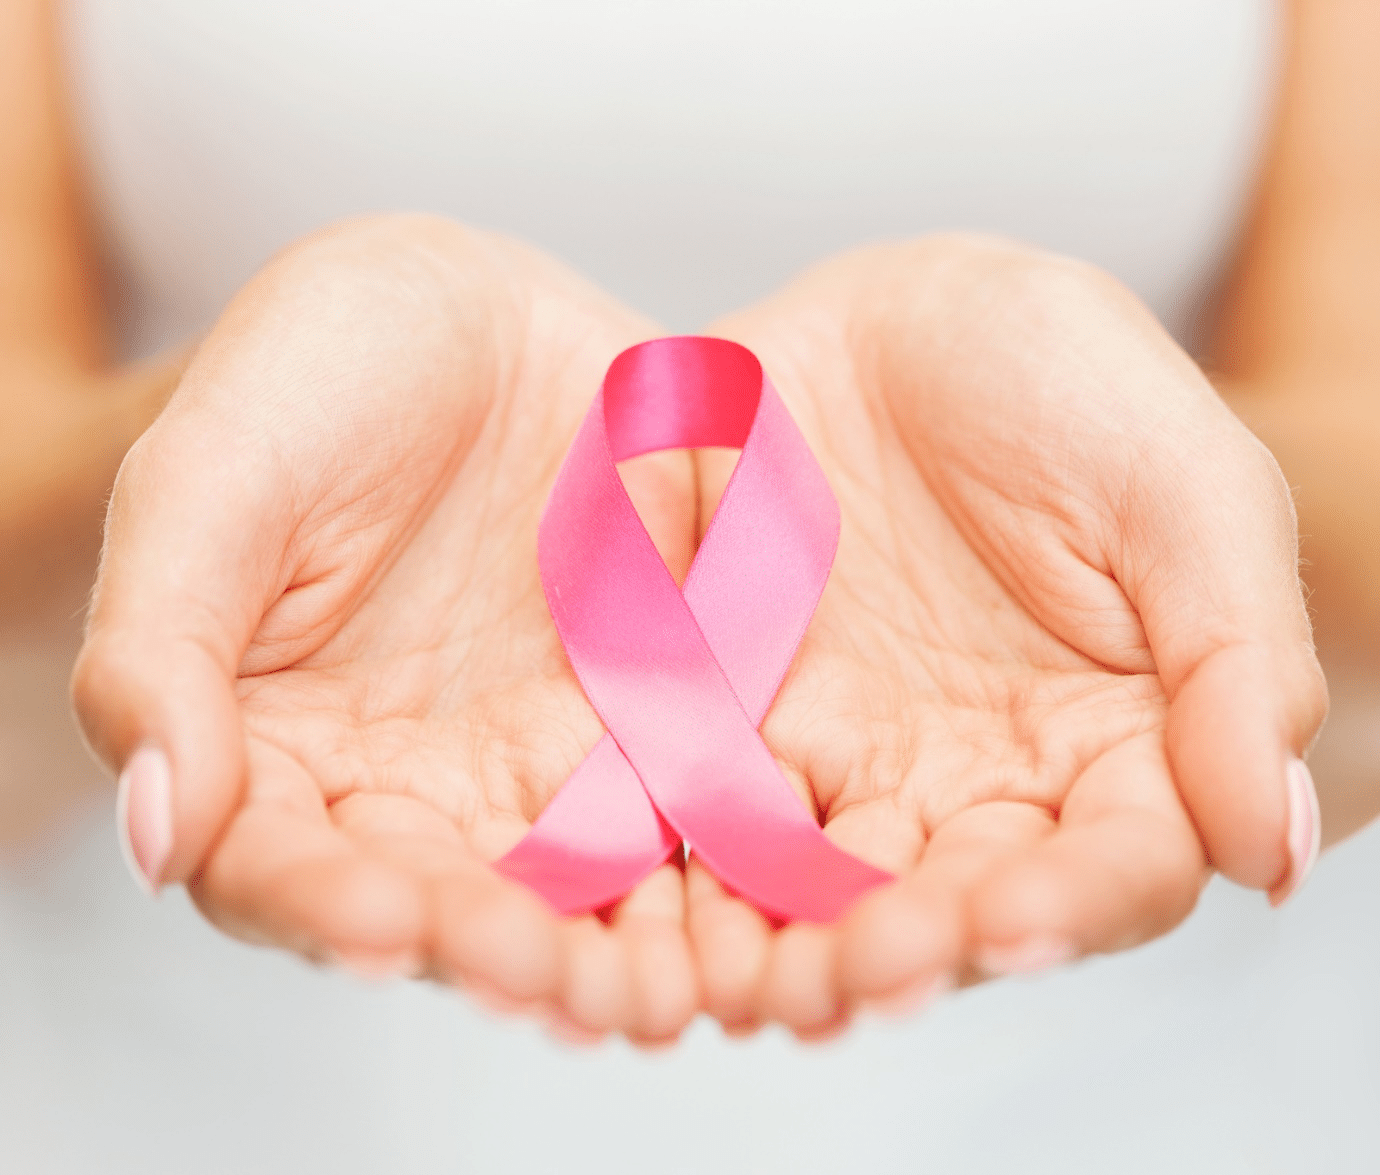 The breast cancer ribbon cupped in a woman’s hands.